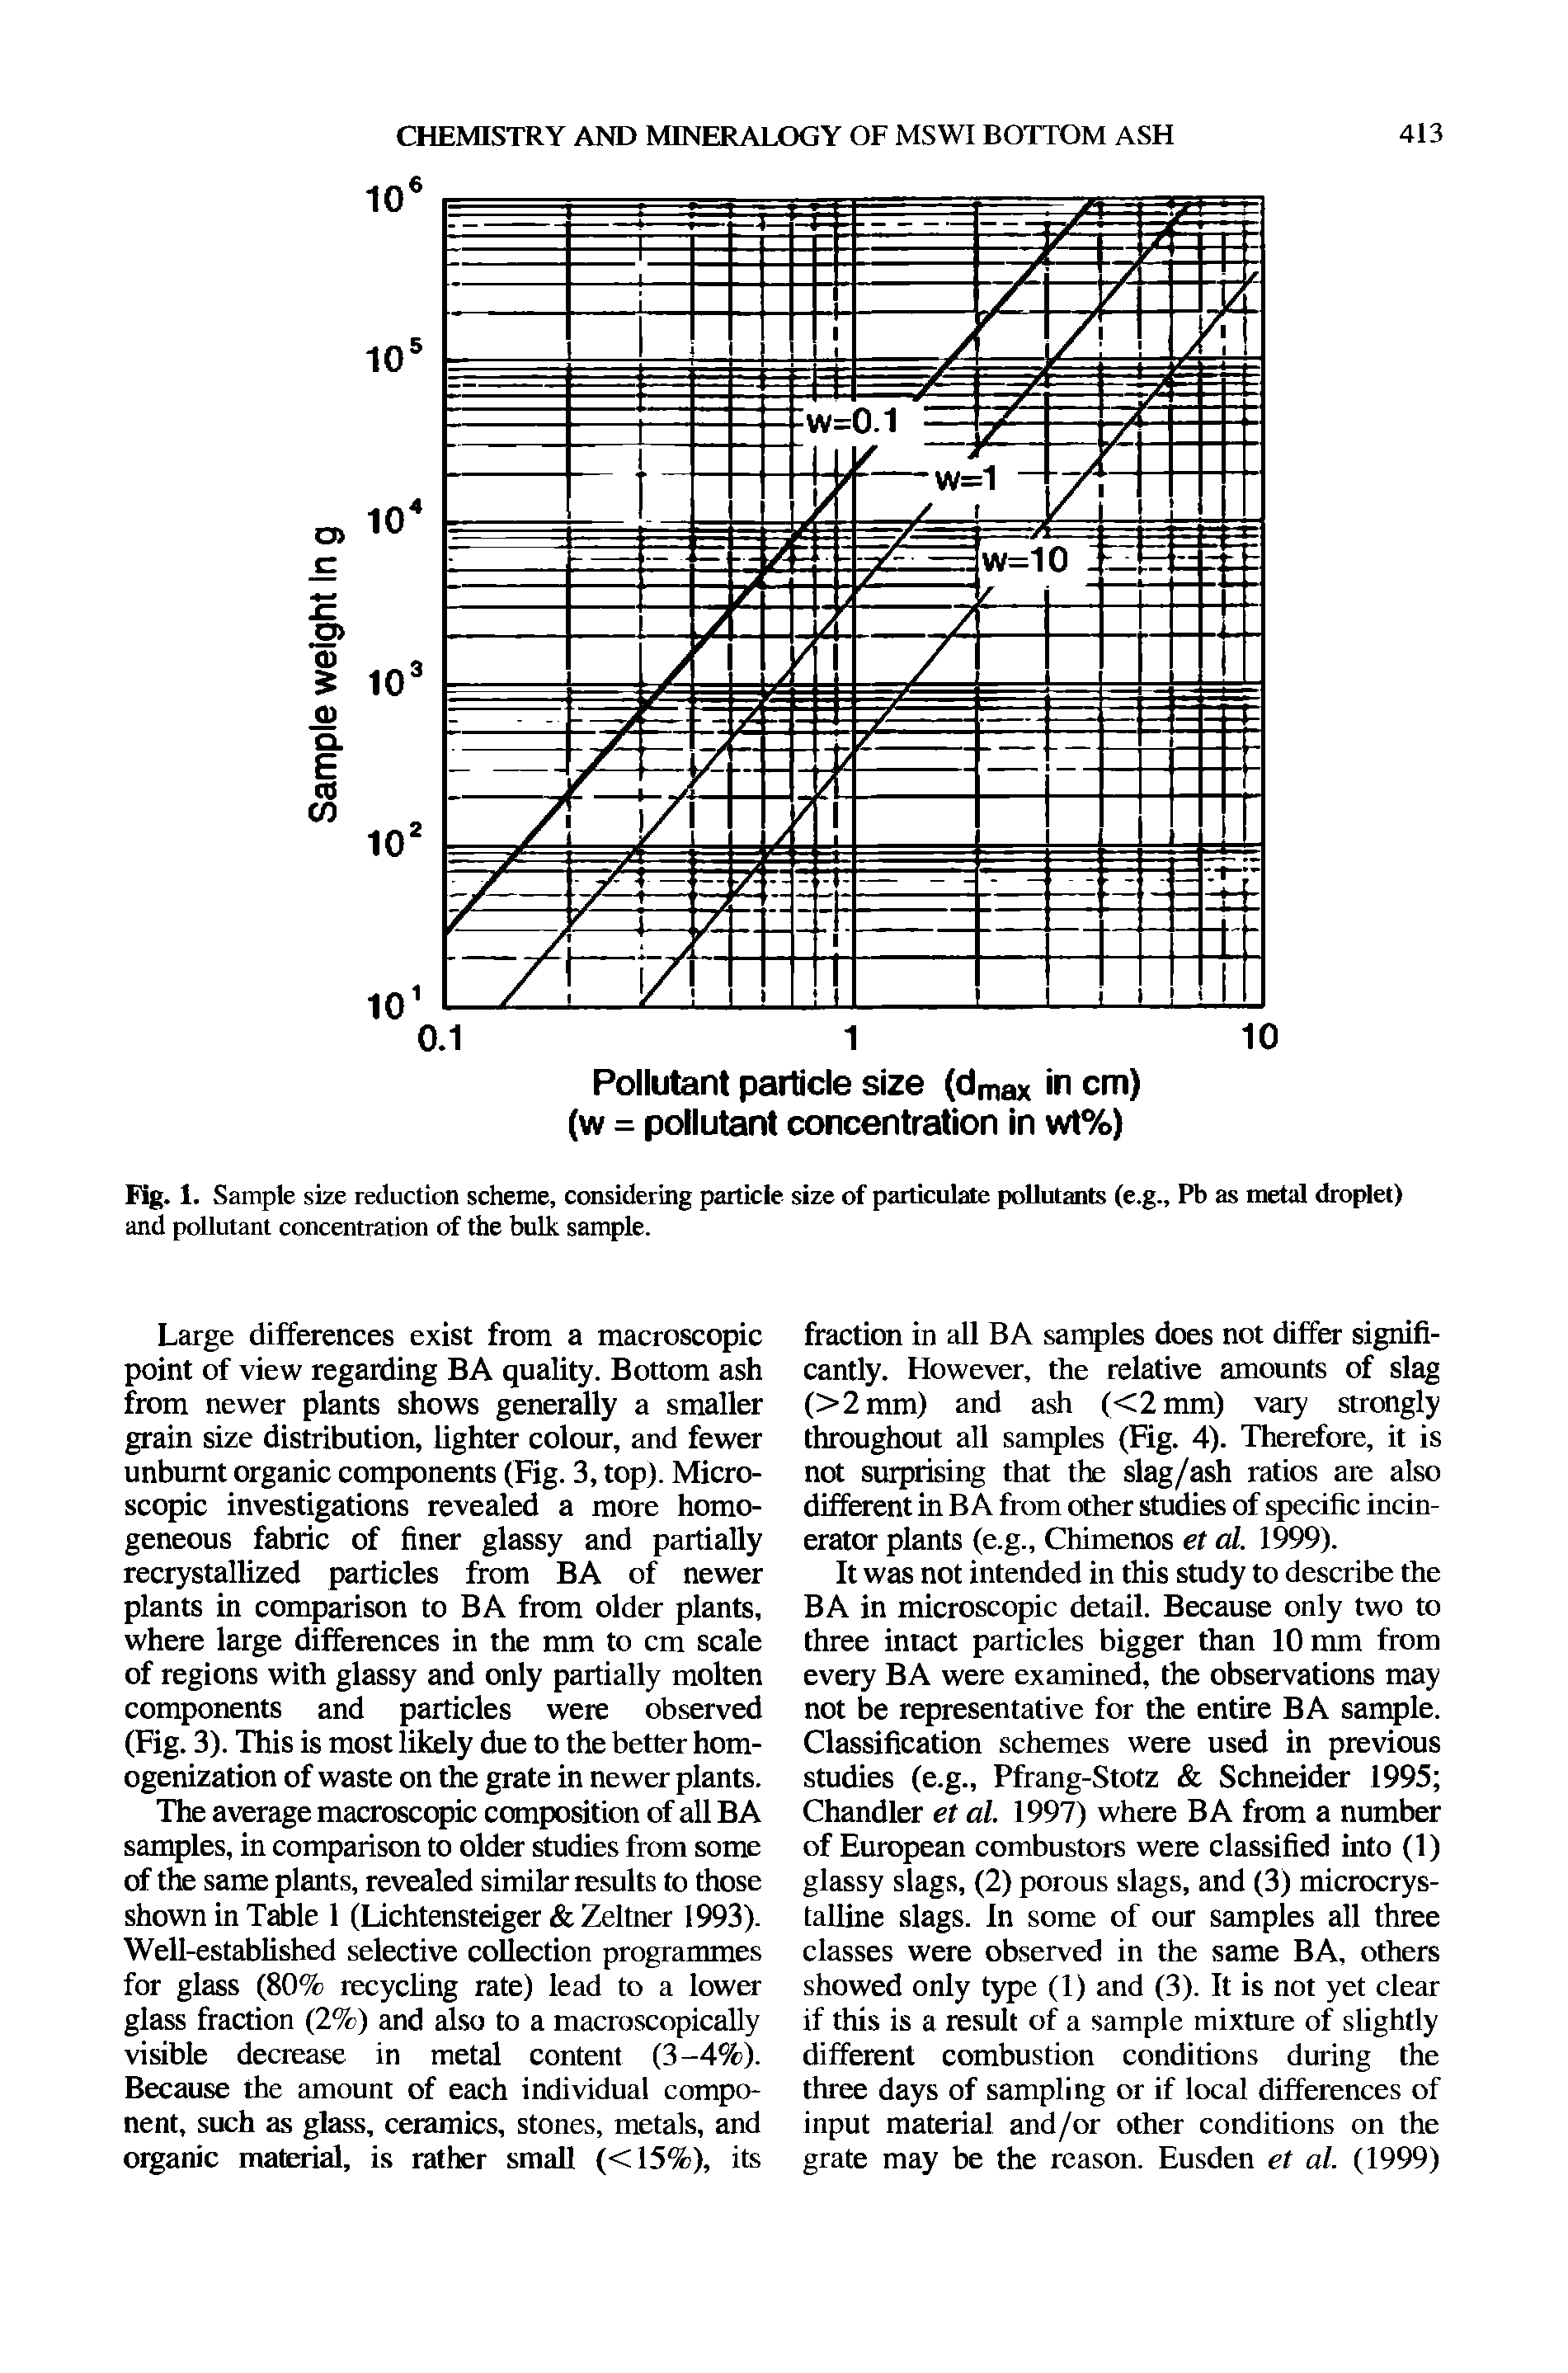 Fig. 1. Sample size reduction scheme, considering particle size of particulate pollutants (e.g., Pb as metal droplet) and pollutant concentration of the bulk sample.